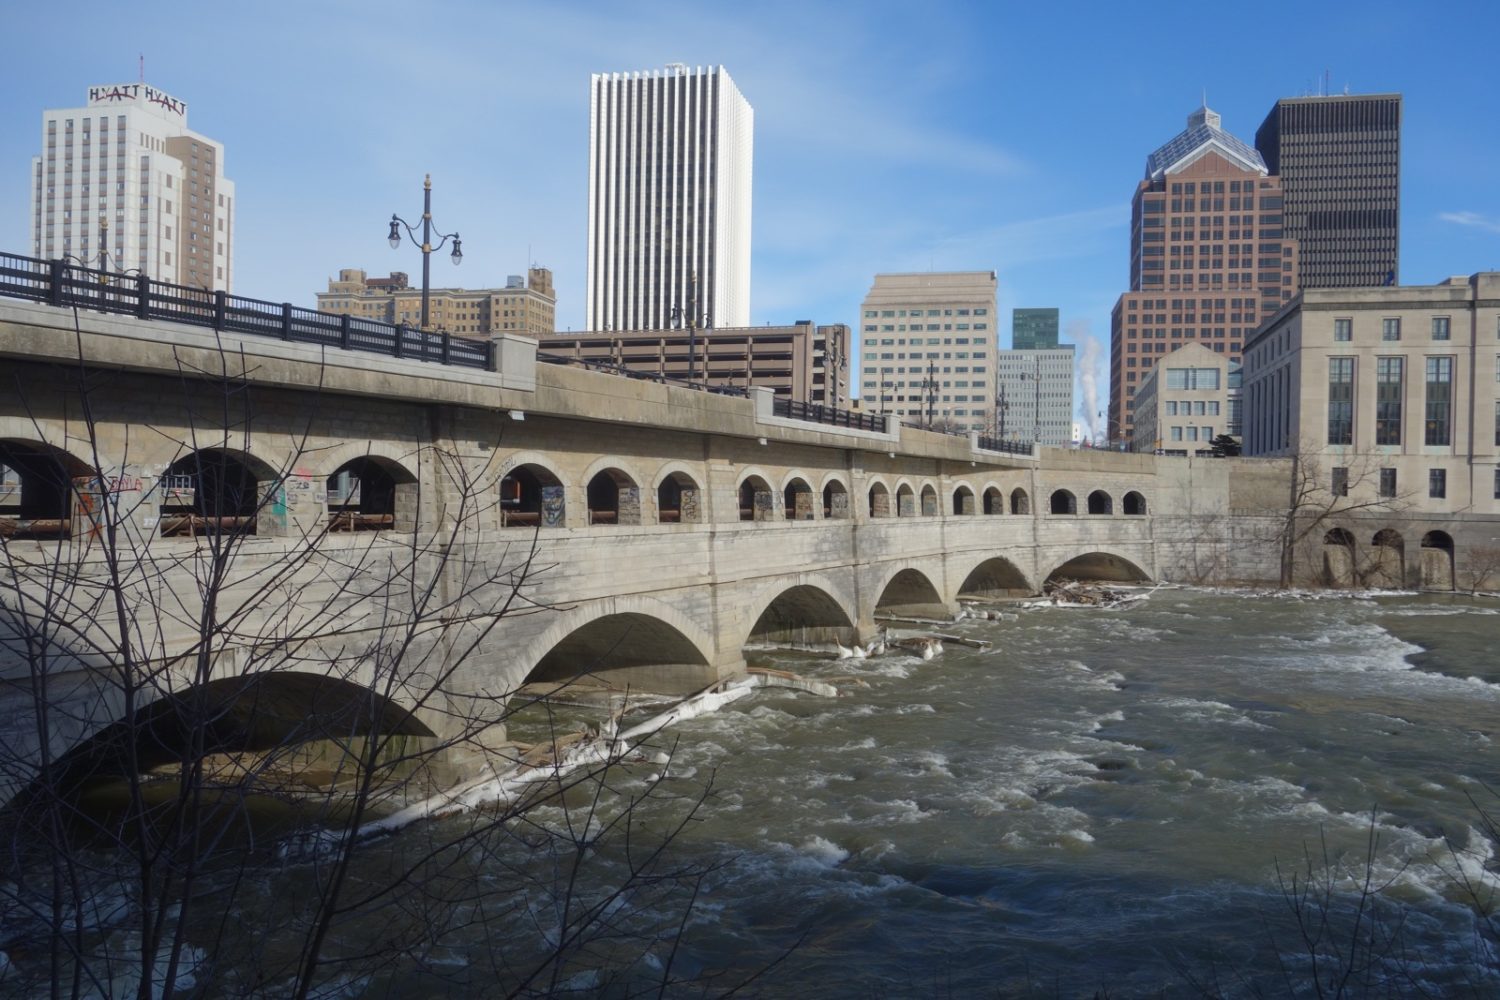 Broad Street Bridge from the west side of the Genesee River in Rochester, New York